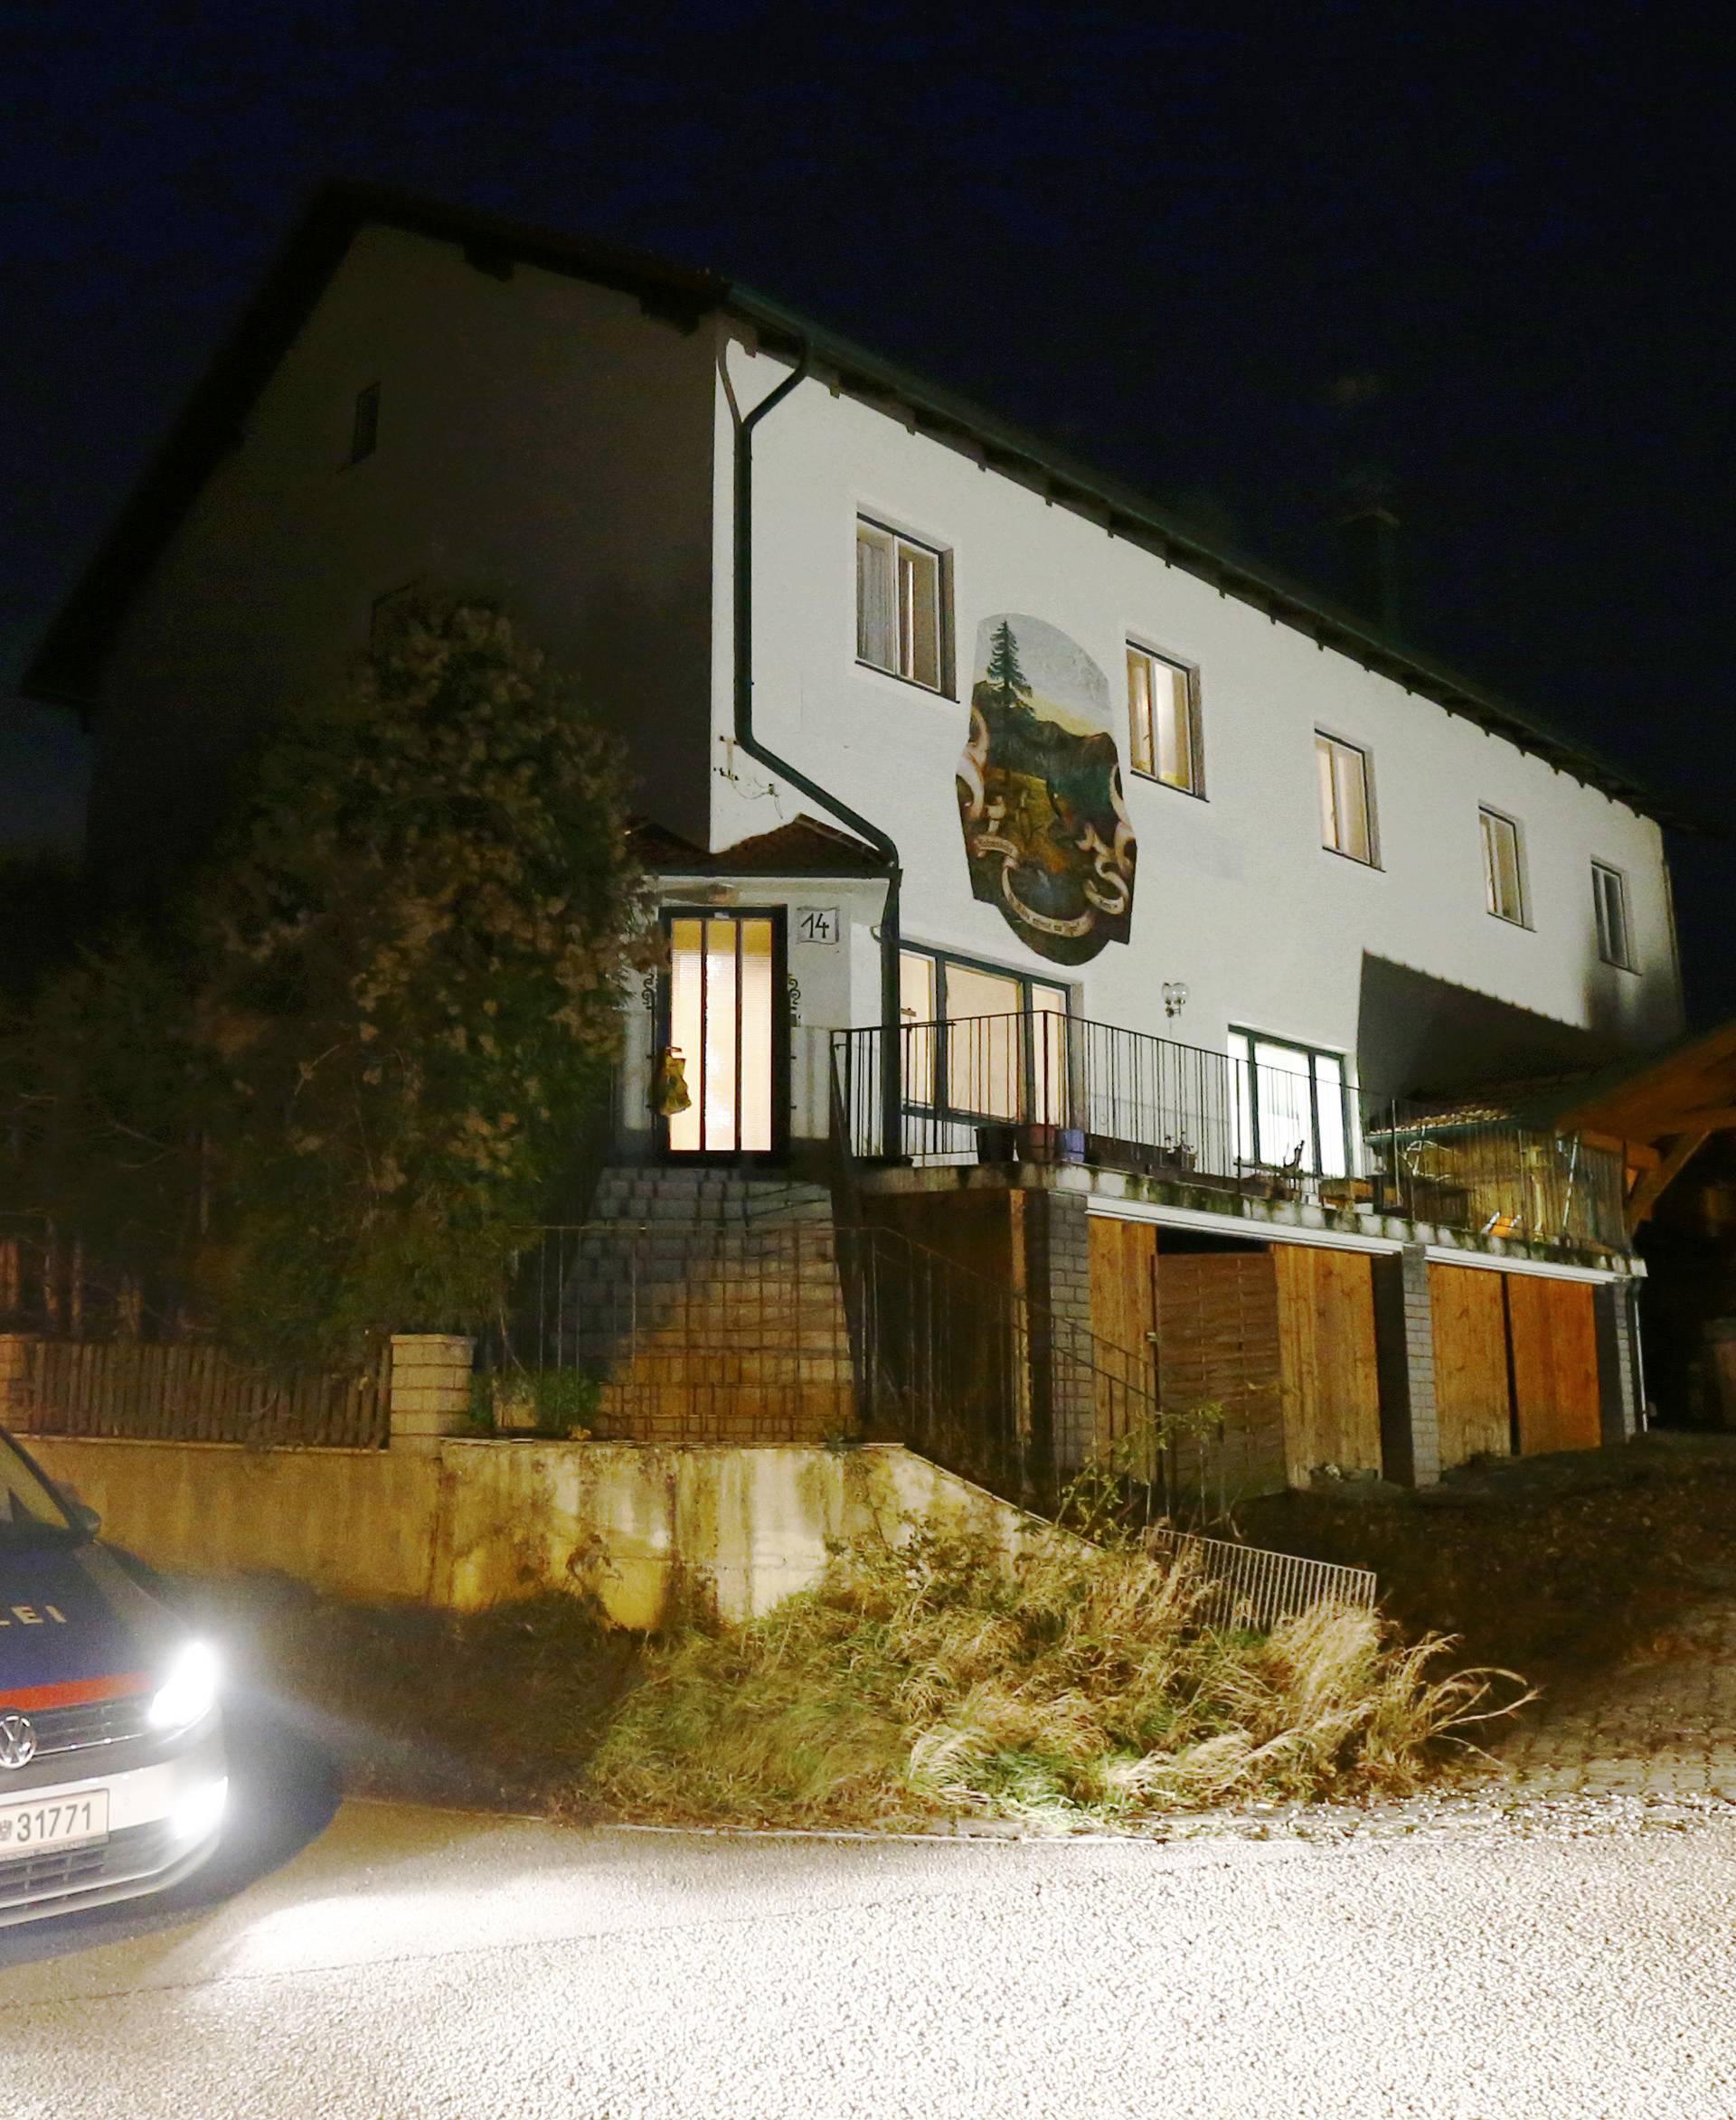 Police stand in front of a house where six people were found dead in Boeheimkirchen